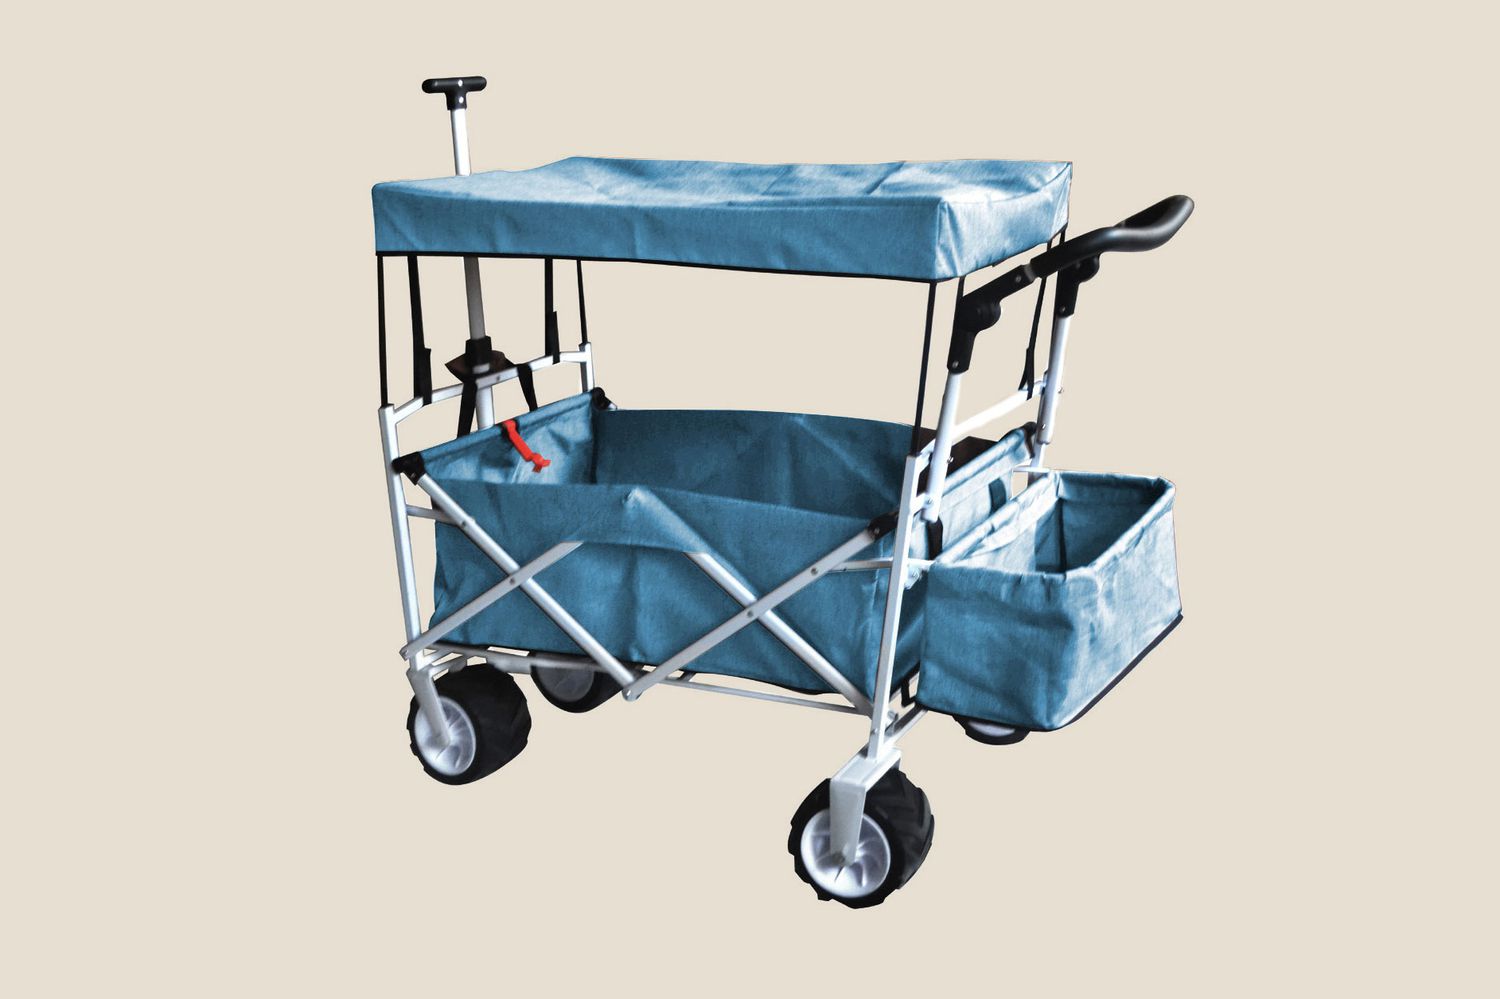 BLACK OUTDOOR PUSH FOLDABLE WAGON CANOPY UTILITY TRAVEL CART WIDE TIRES BRAKE 